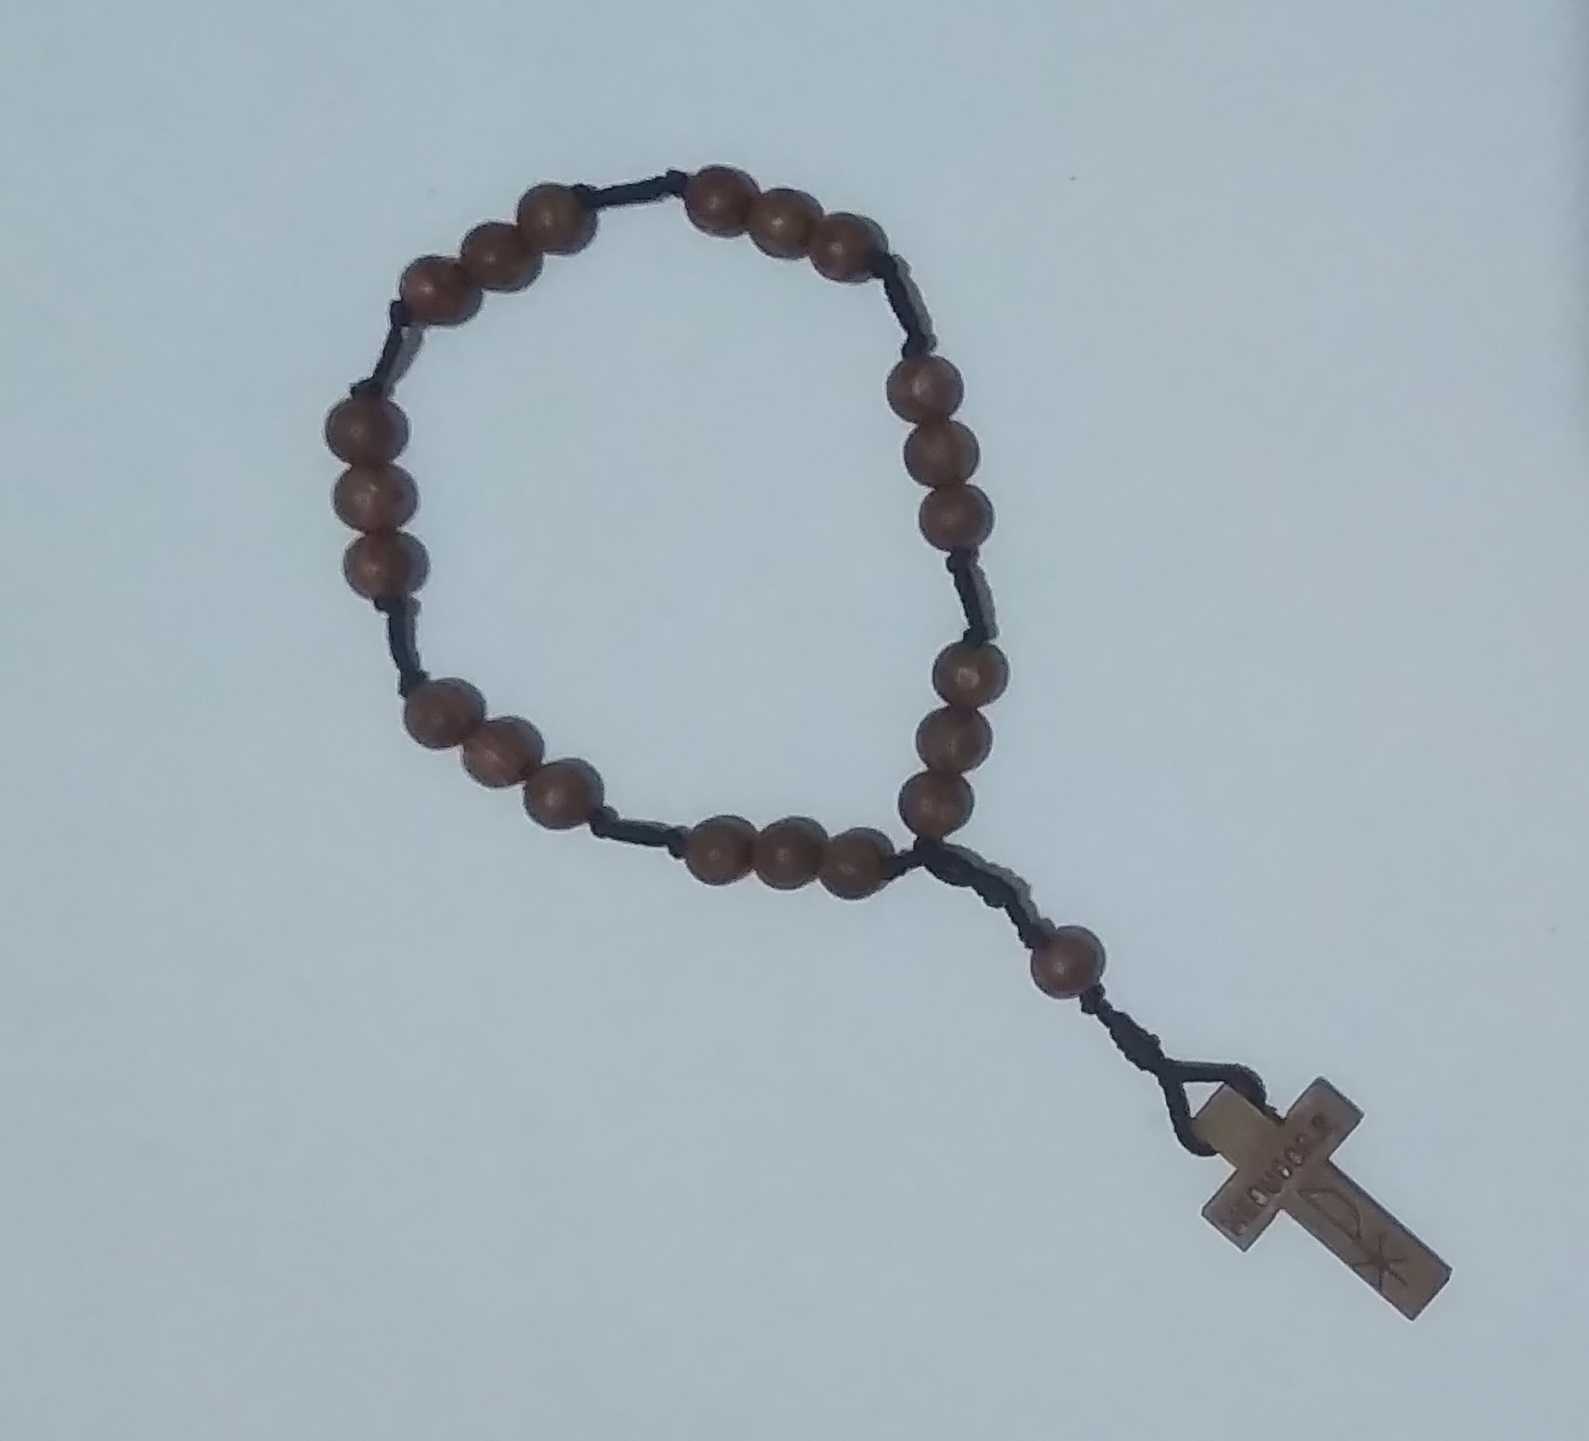 CHAPLET OF THE HOLY FACE - CROSS BEADS